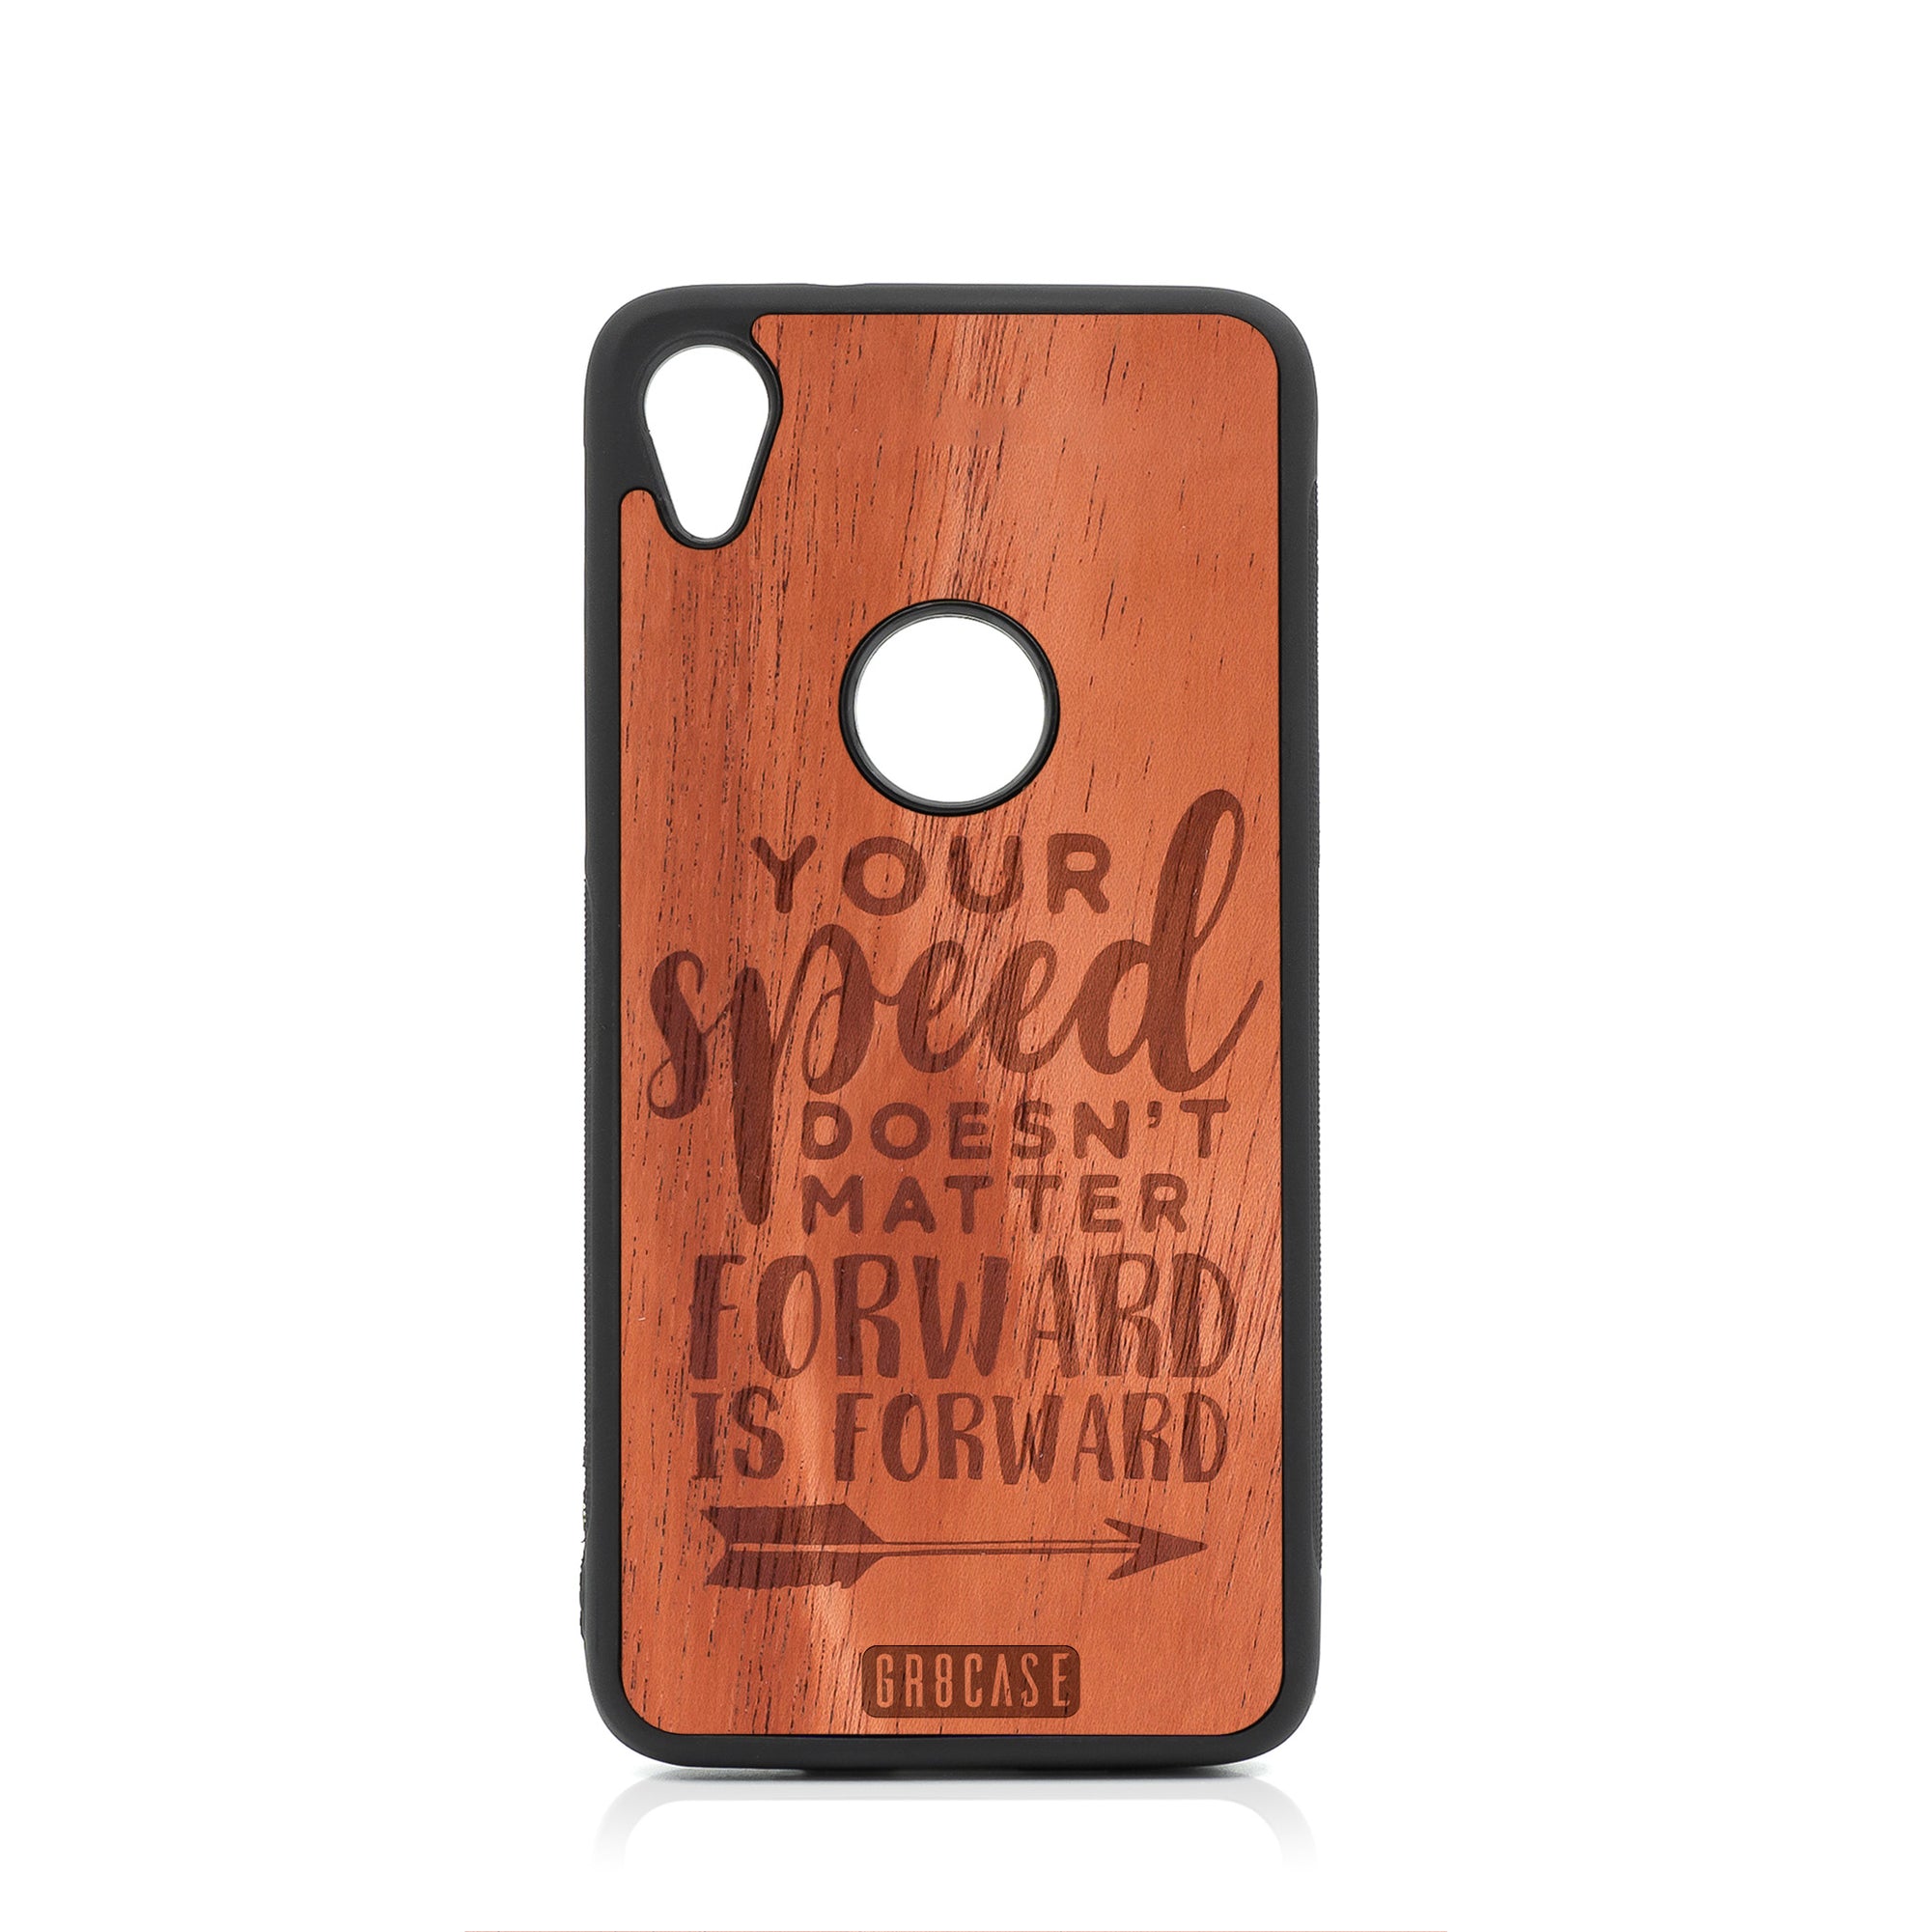 Your Speed Doesn't Matter Forward Is Forward Design Wood Case For Moto E6